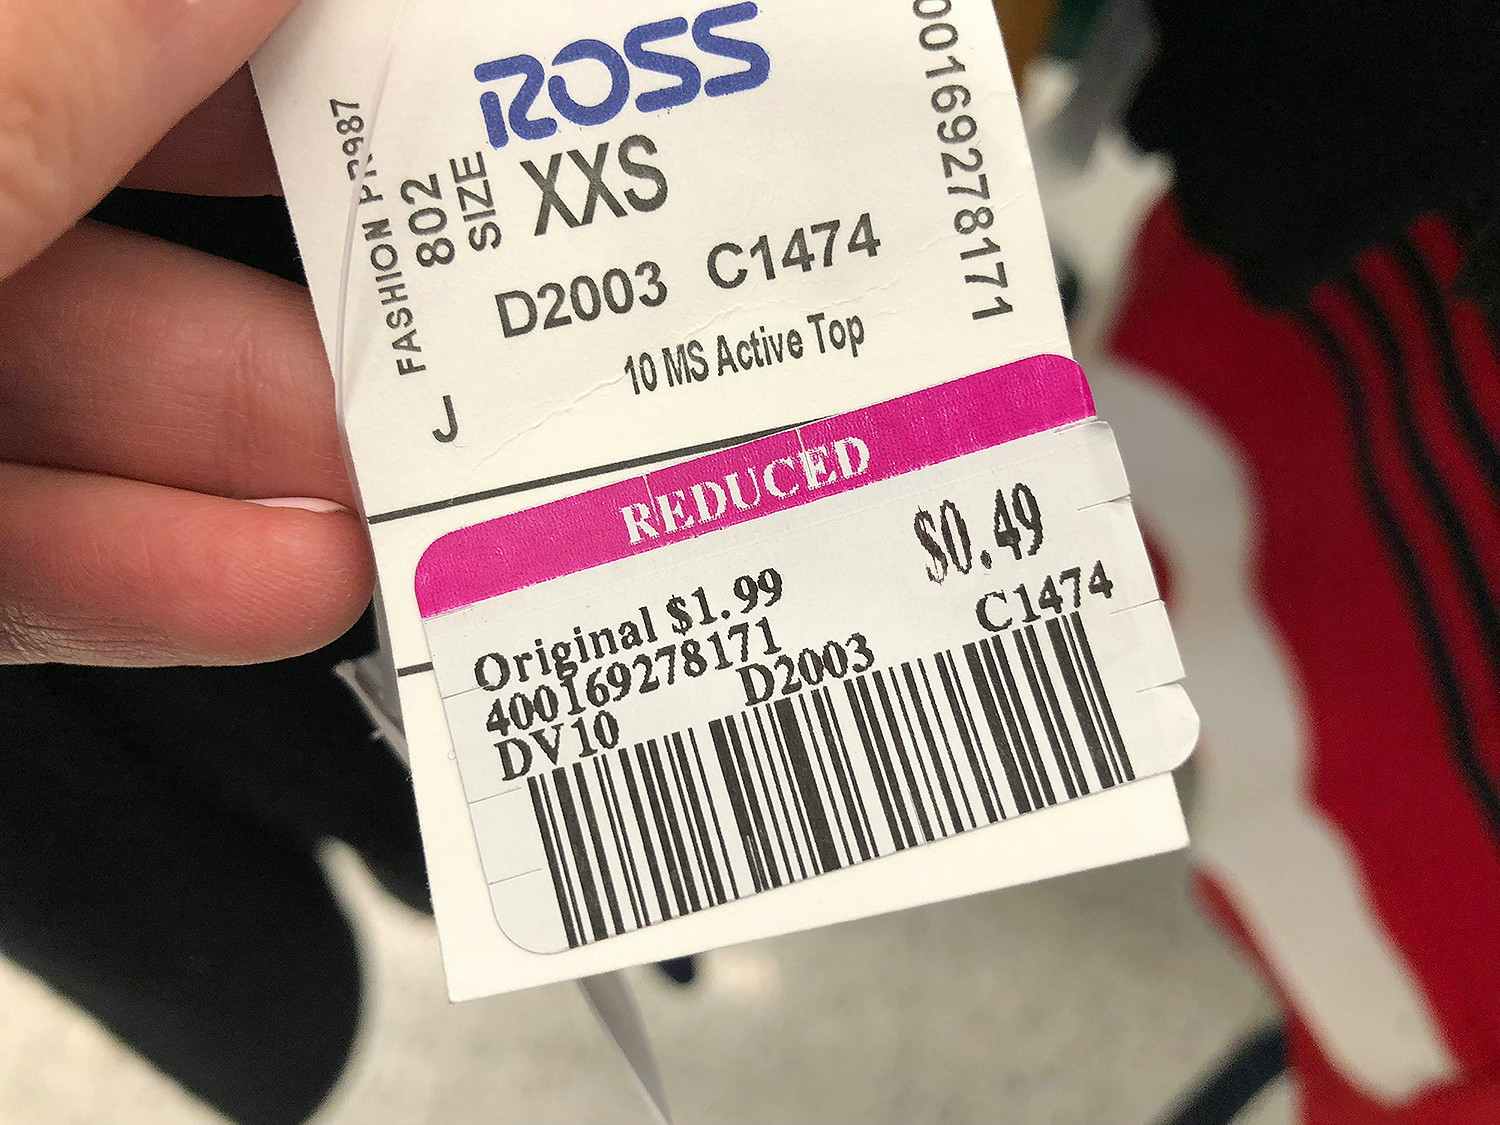 9 Fast Facts About Ross Dress For Less & Why Prices Are So Cheap